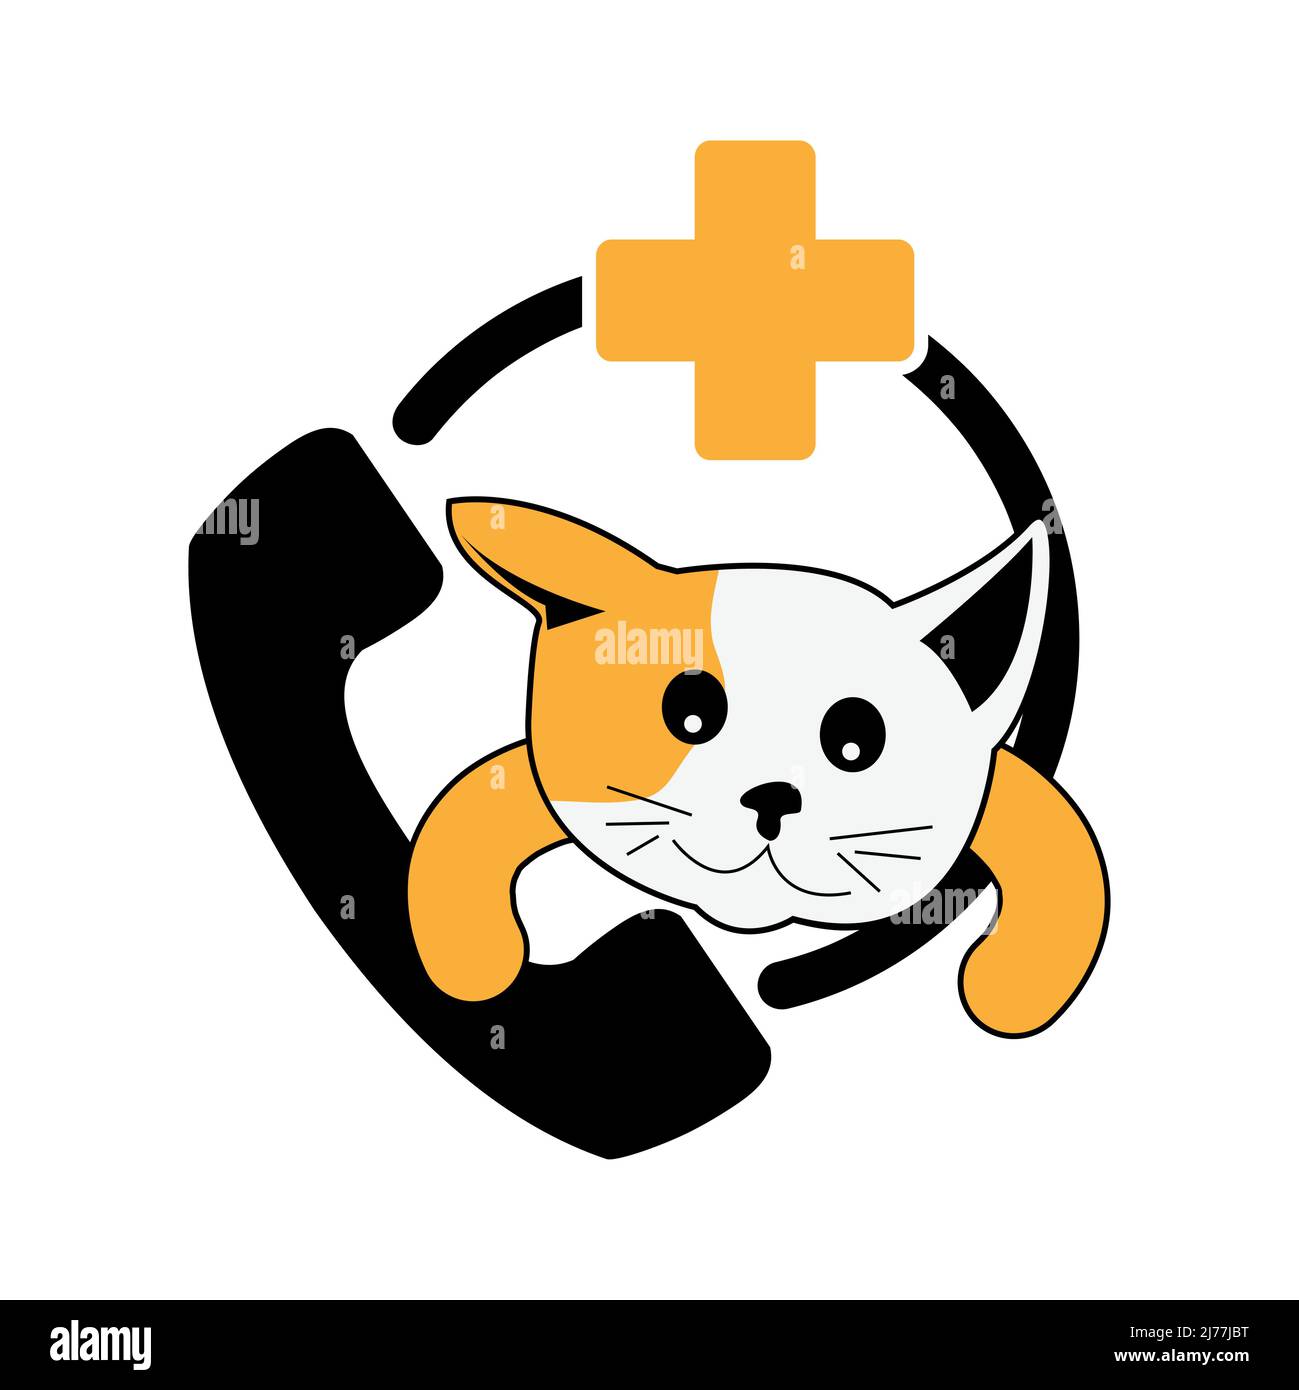 Call for consultation about pet cats. Flat design. Vector Illustration on white background. Stock Vector